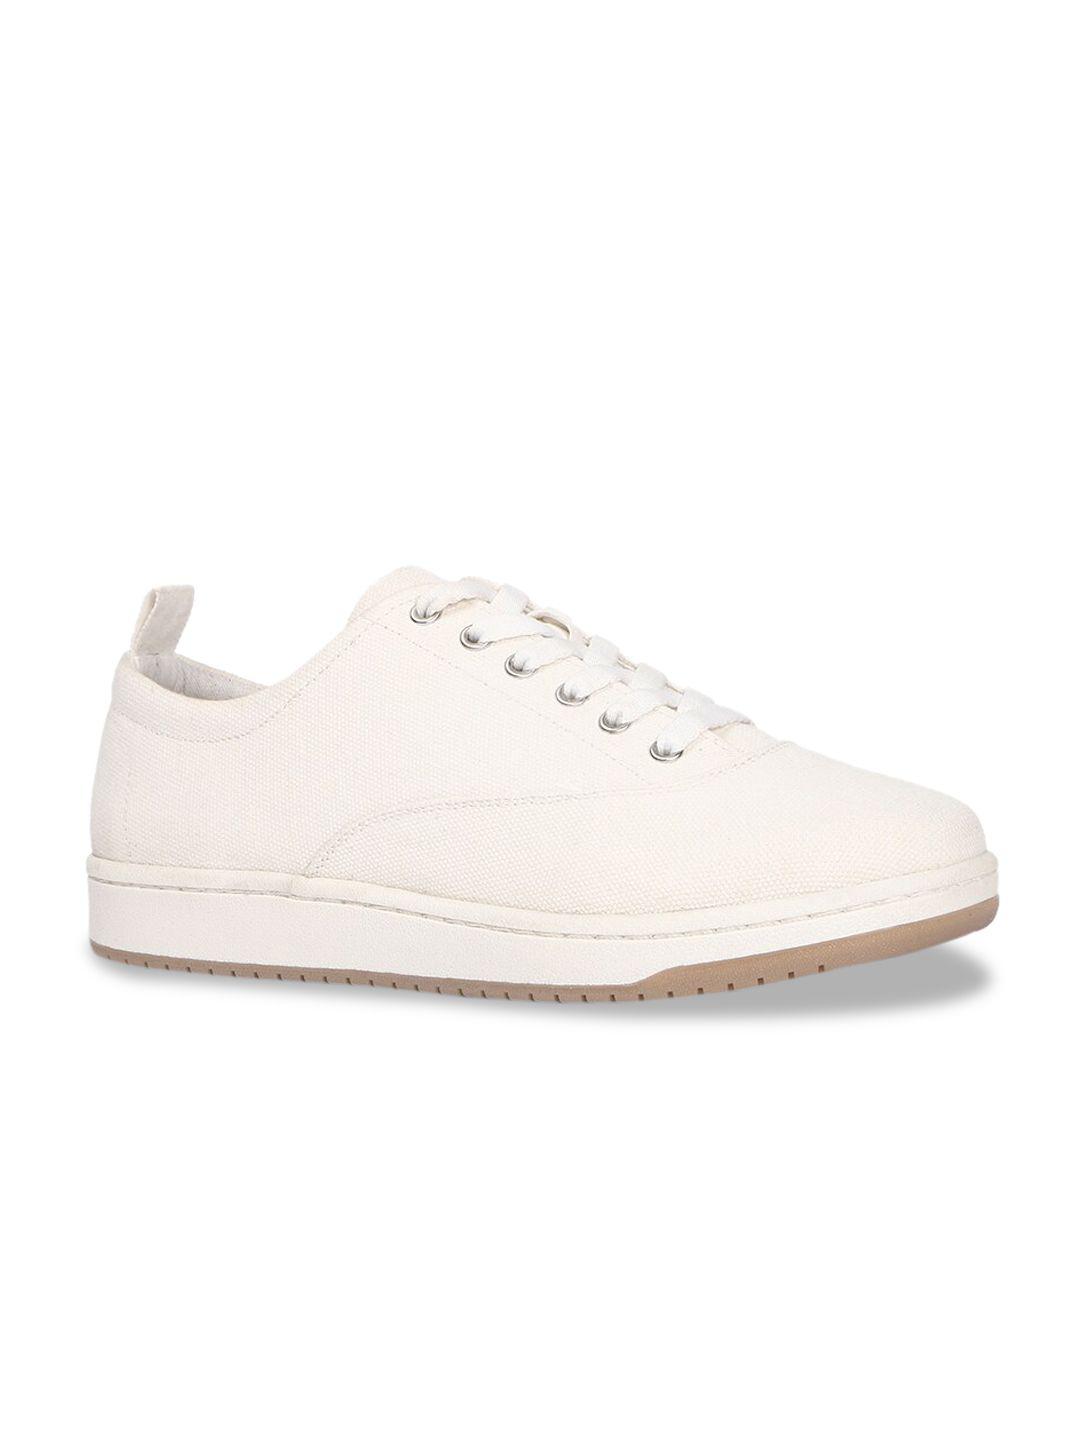 forever 21 men white sneakers shoes